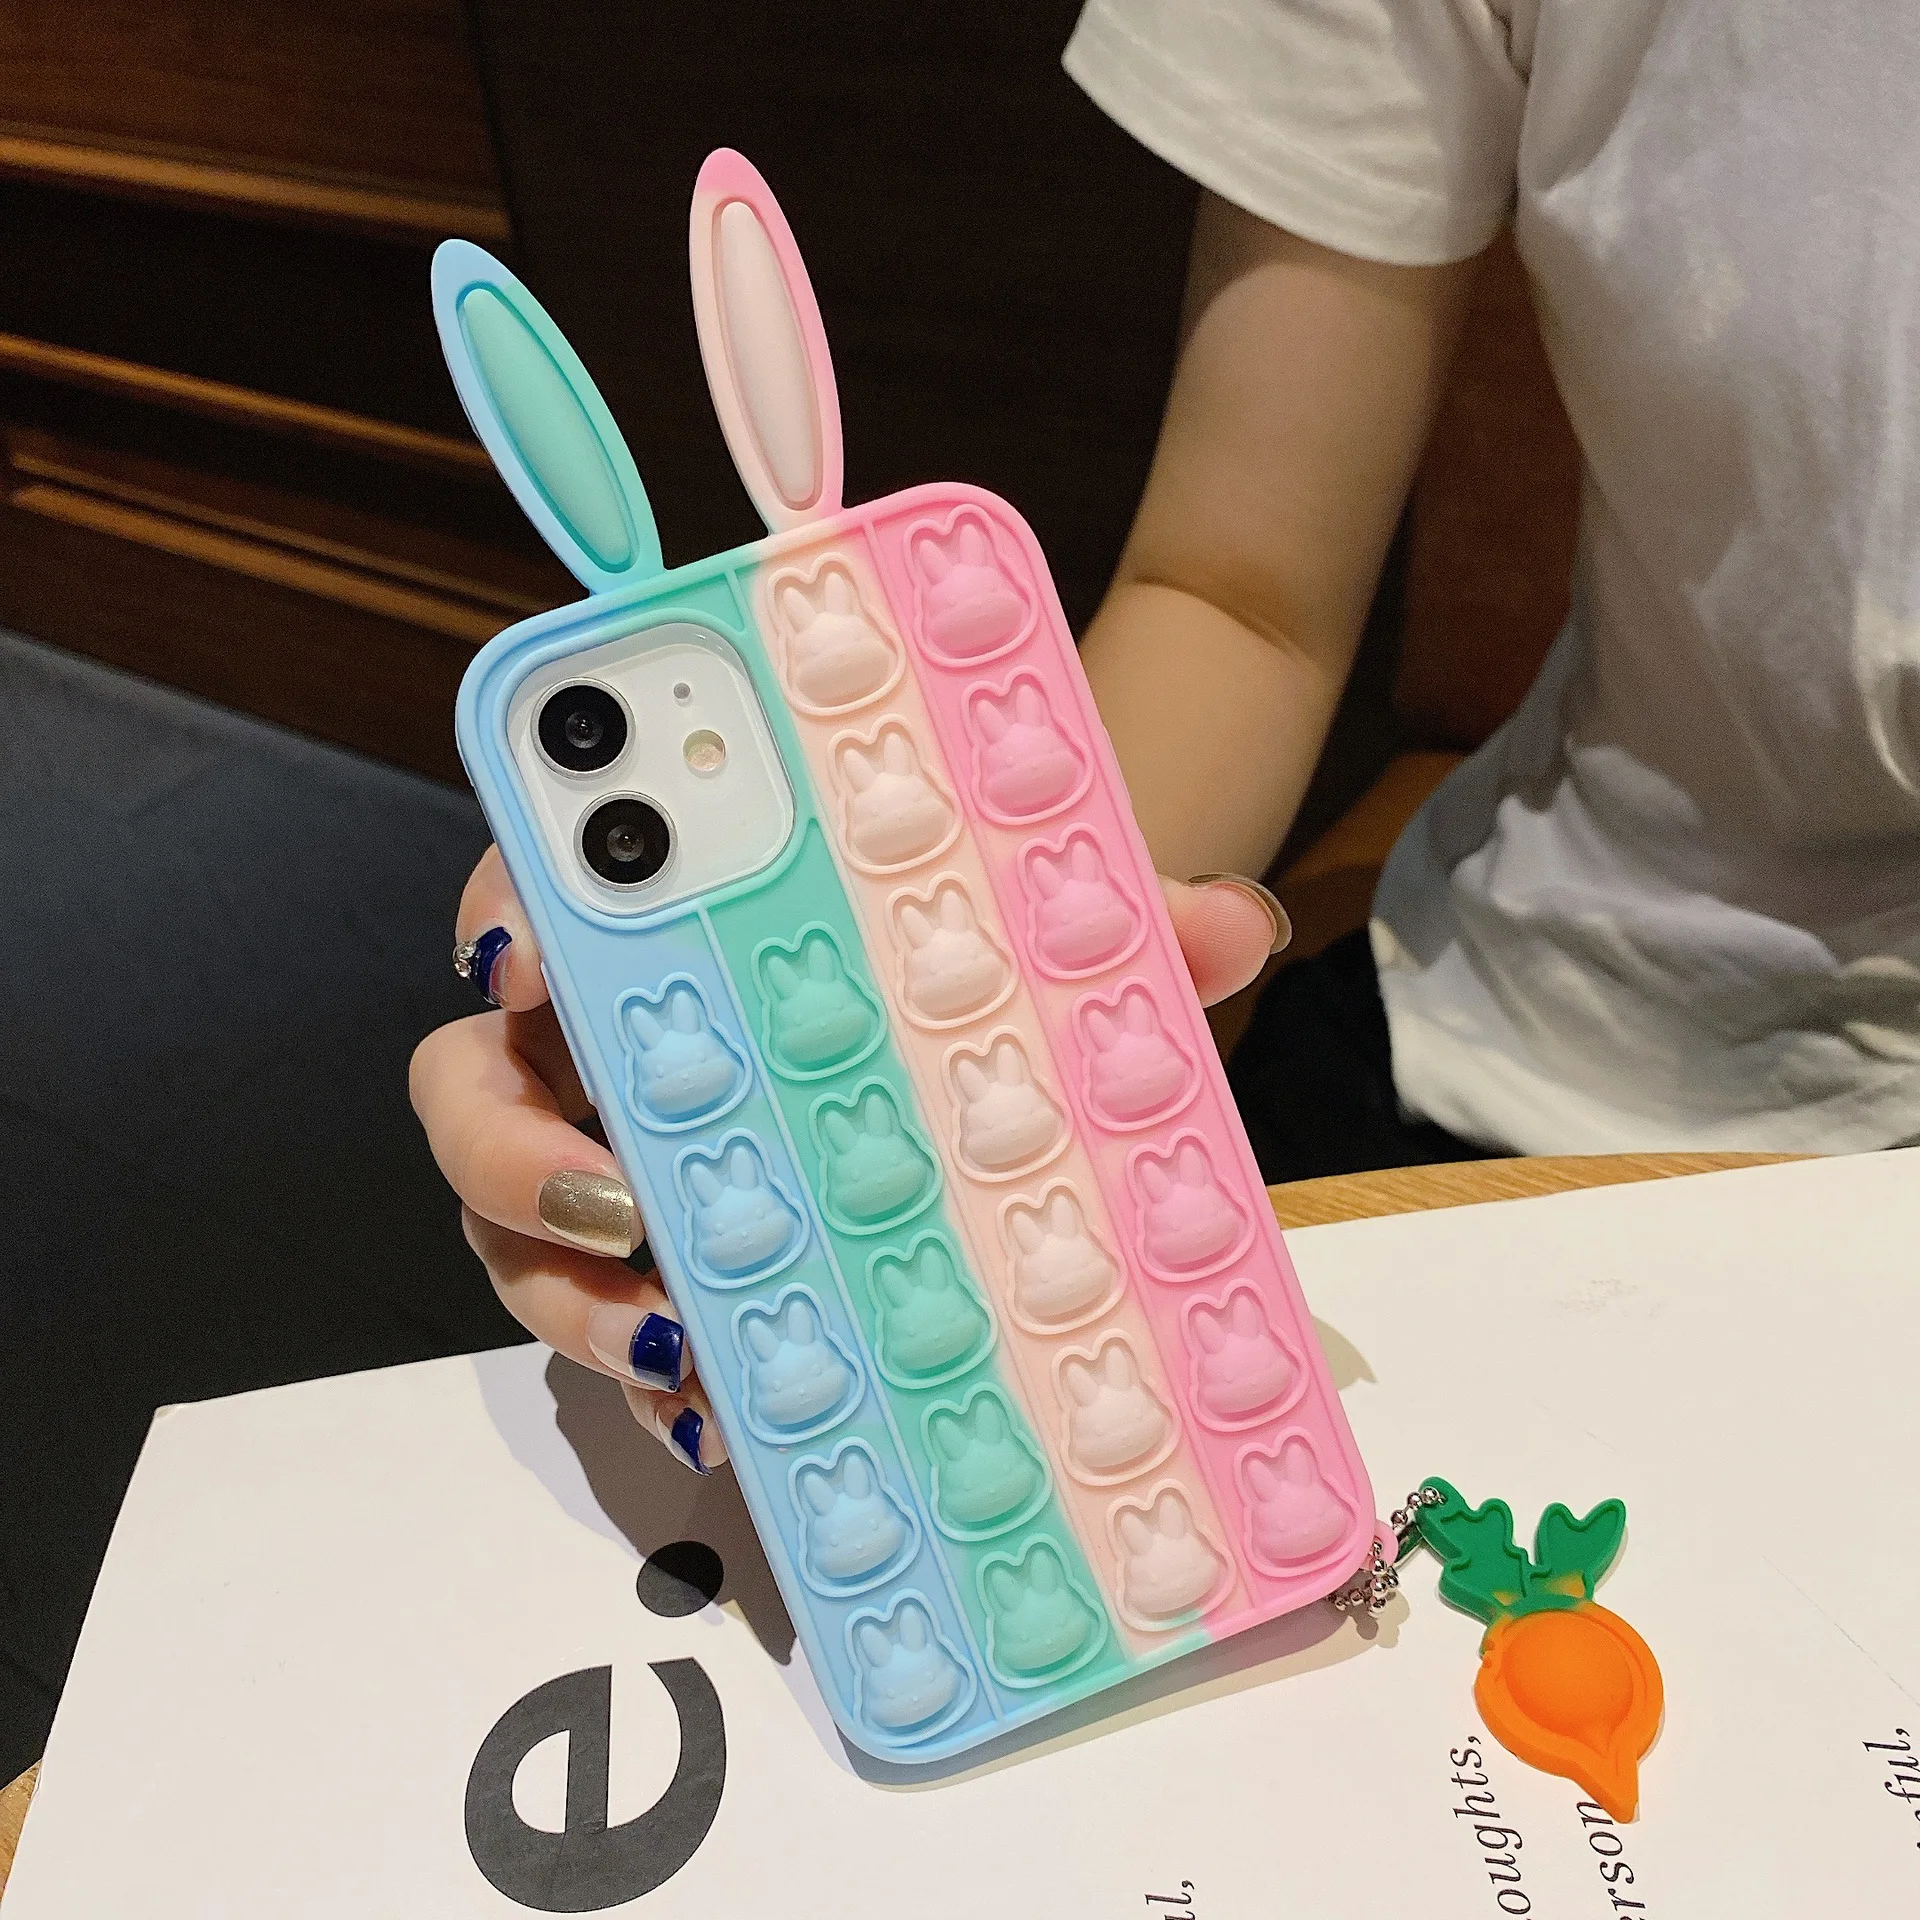 

2021 Popping it Phone Case for iPhone 11 Case Silicone Shockproof Back Cover Push Bubble Fidget Toy Phone Case for iPhone 12 13, A variety of color